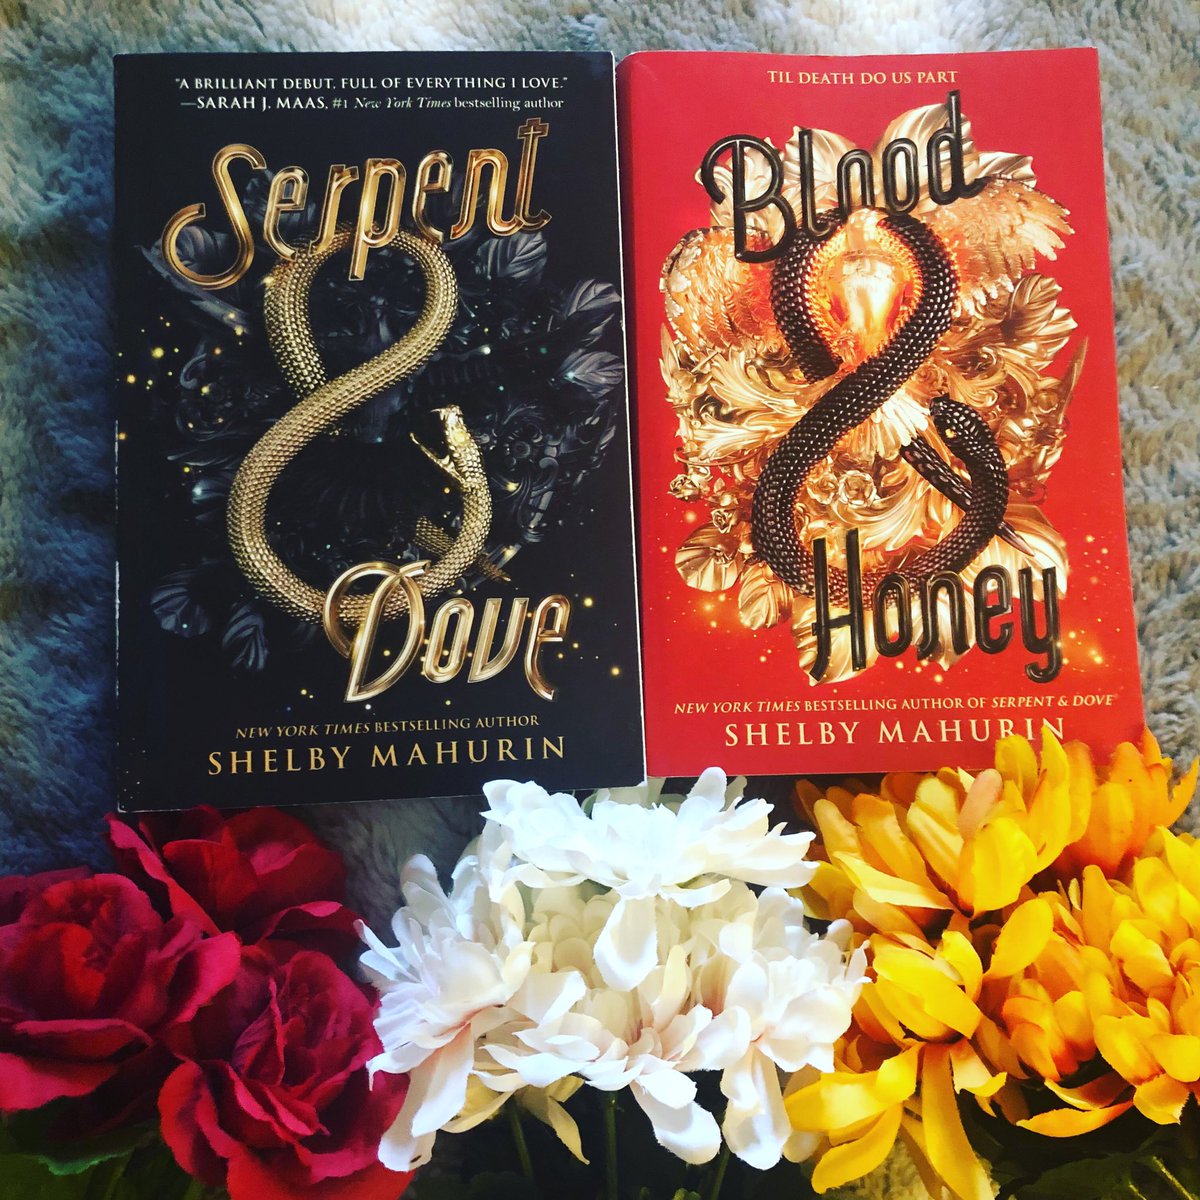 Only ELEVEN DAYS until the thrilling finale of this trilogy! It’s gives you JUST enough time to binge read the first two! @shelbymahurin